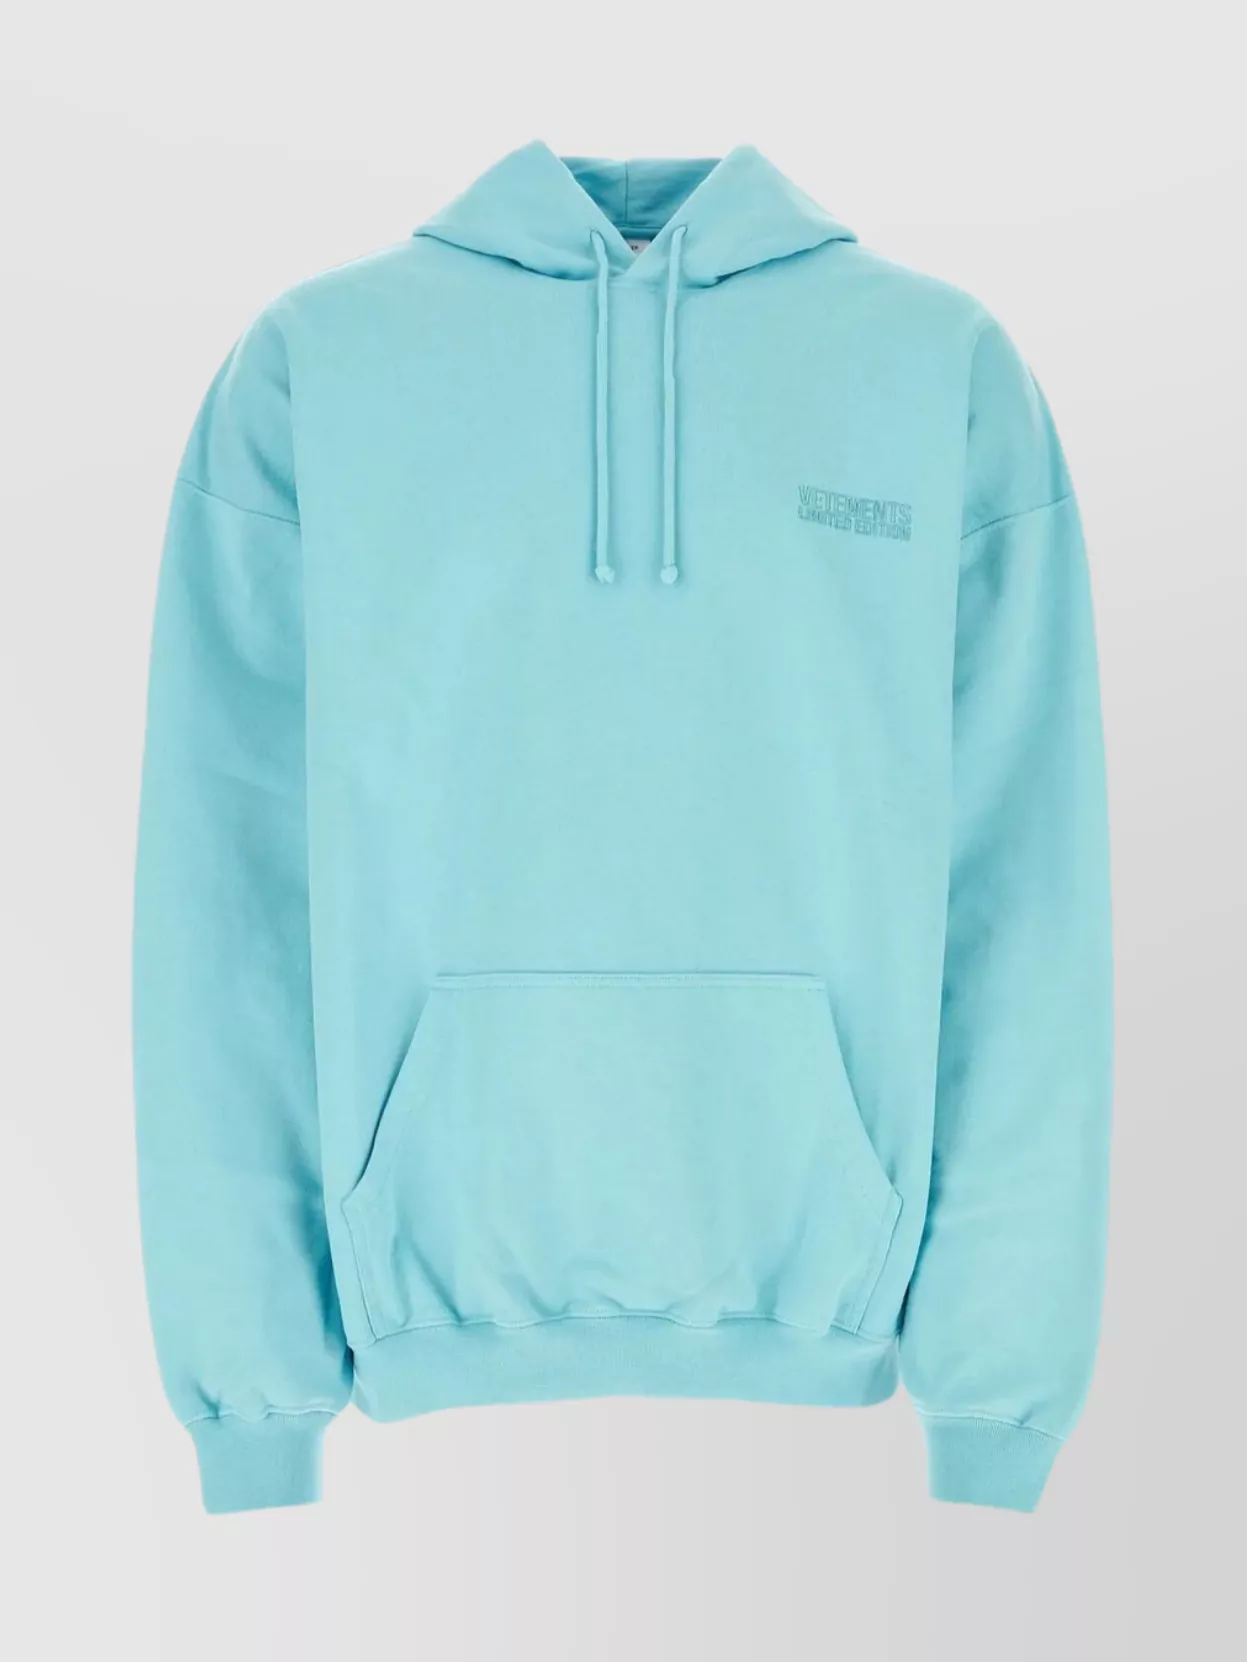 Shop Vetements Cotton Blend Hooded Sweatshirt With Pouch Pocket